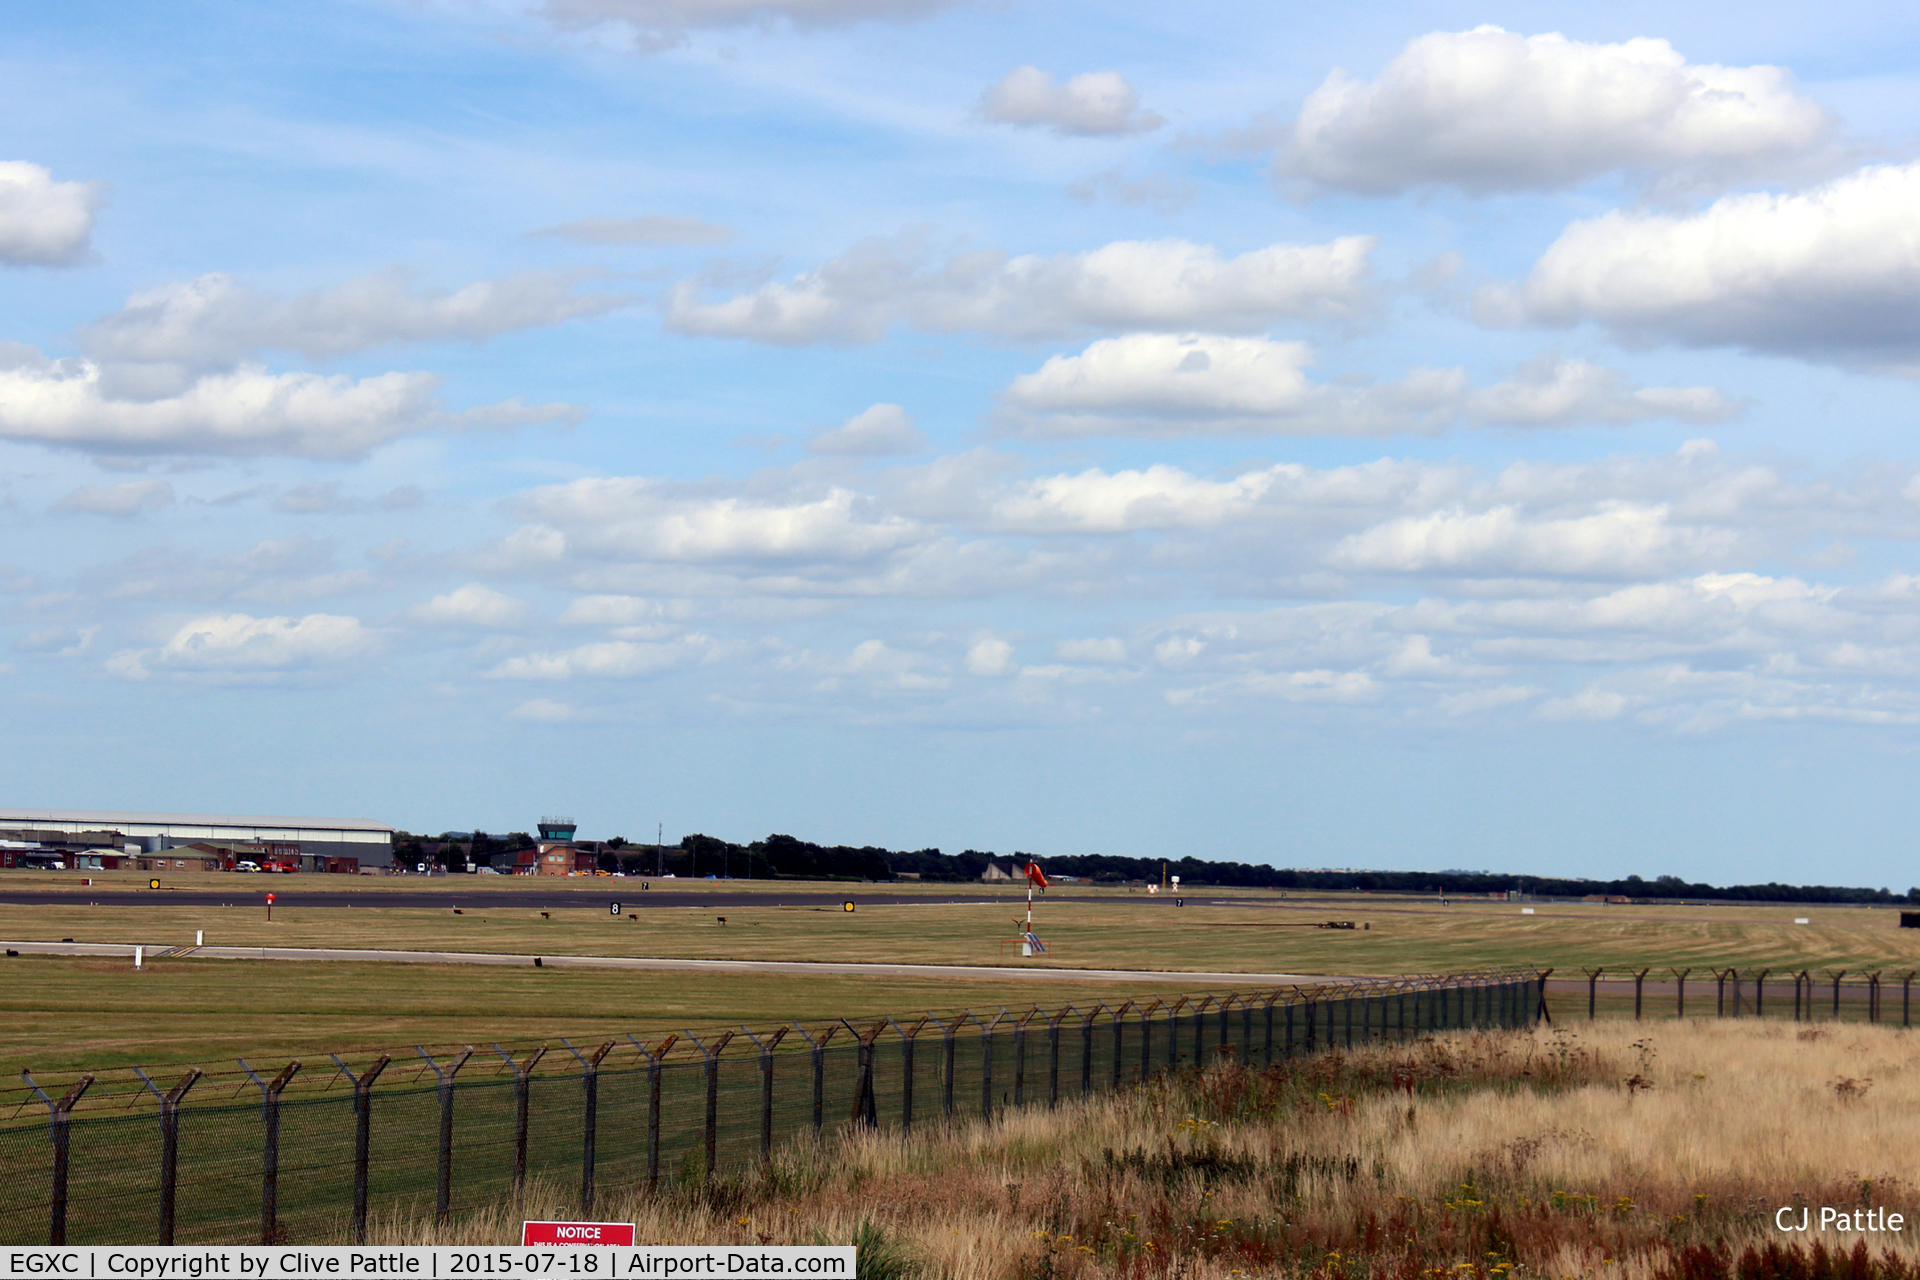 RAF Coningsby Airport, Coningsby, England United Kingdom (EGXC) - Airfield view RAF Coningsby EGXC showing the centrally located tower looking northeast